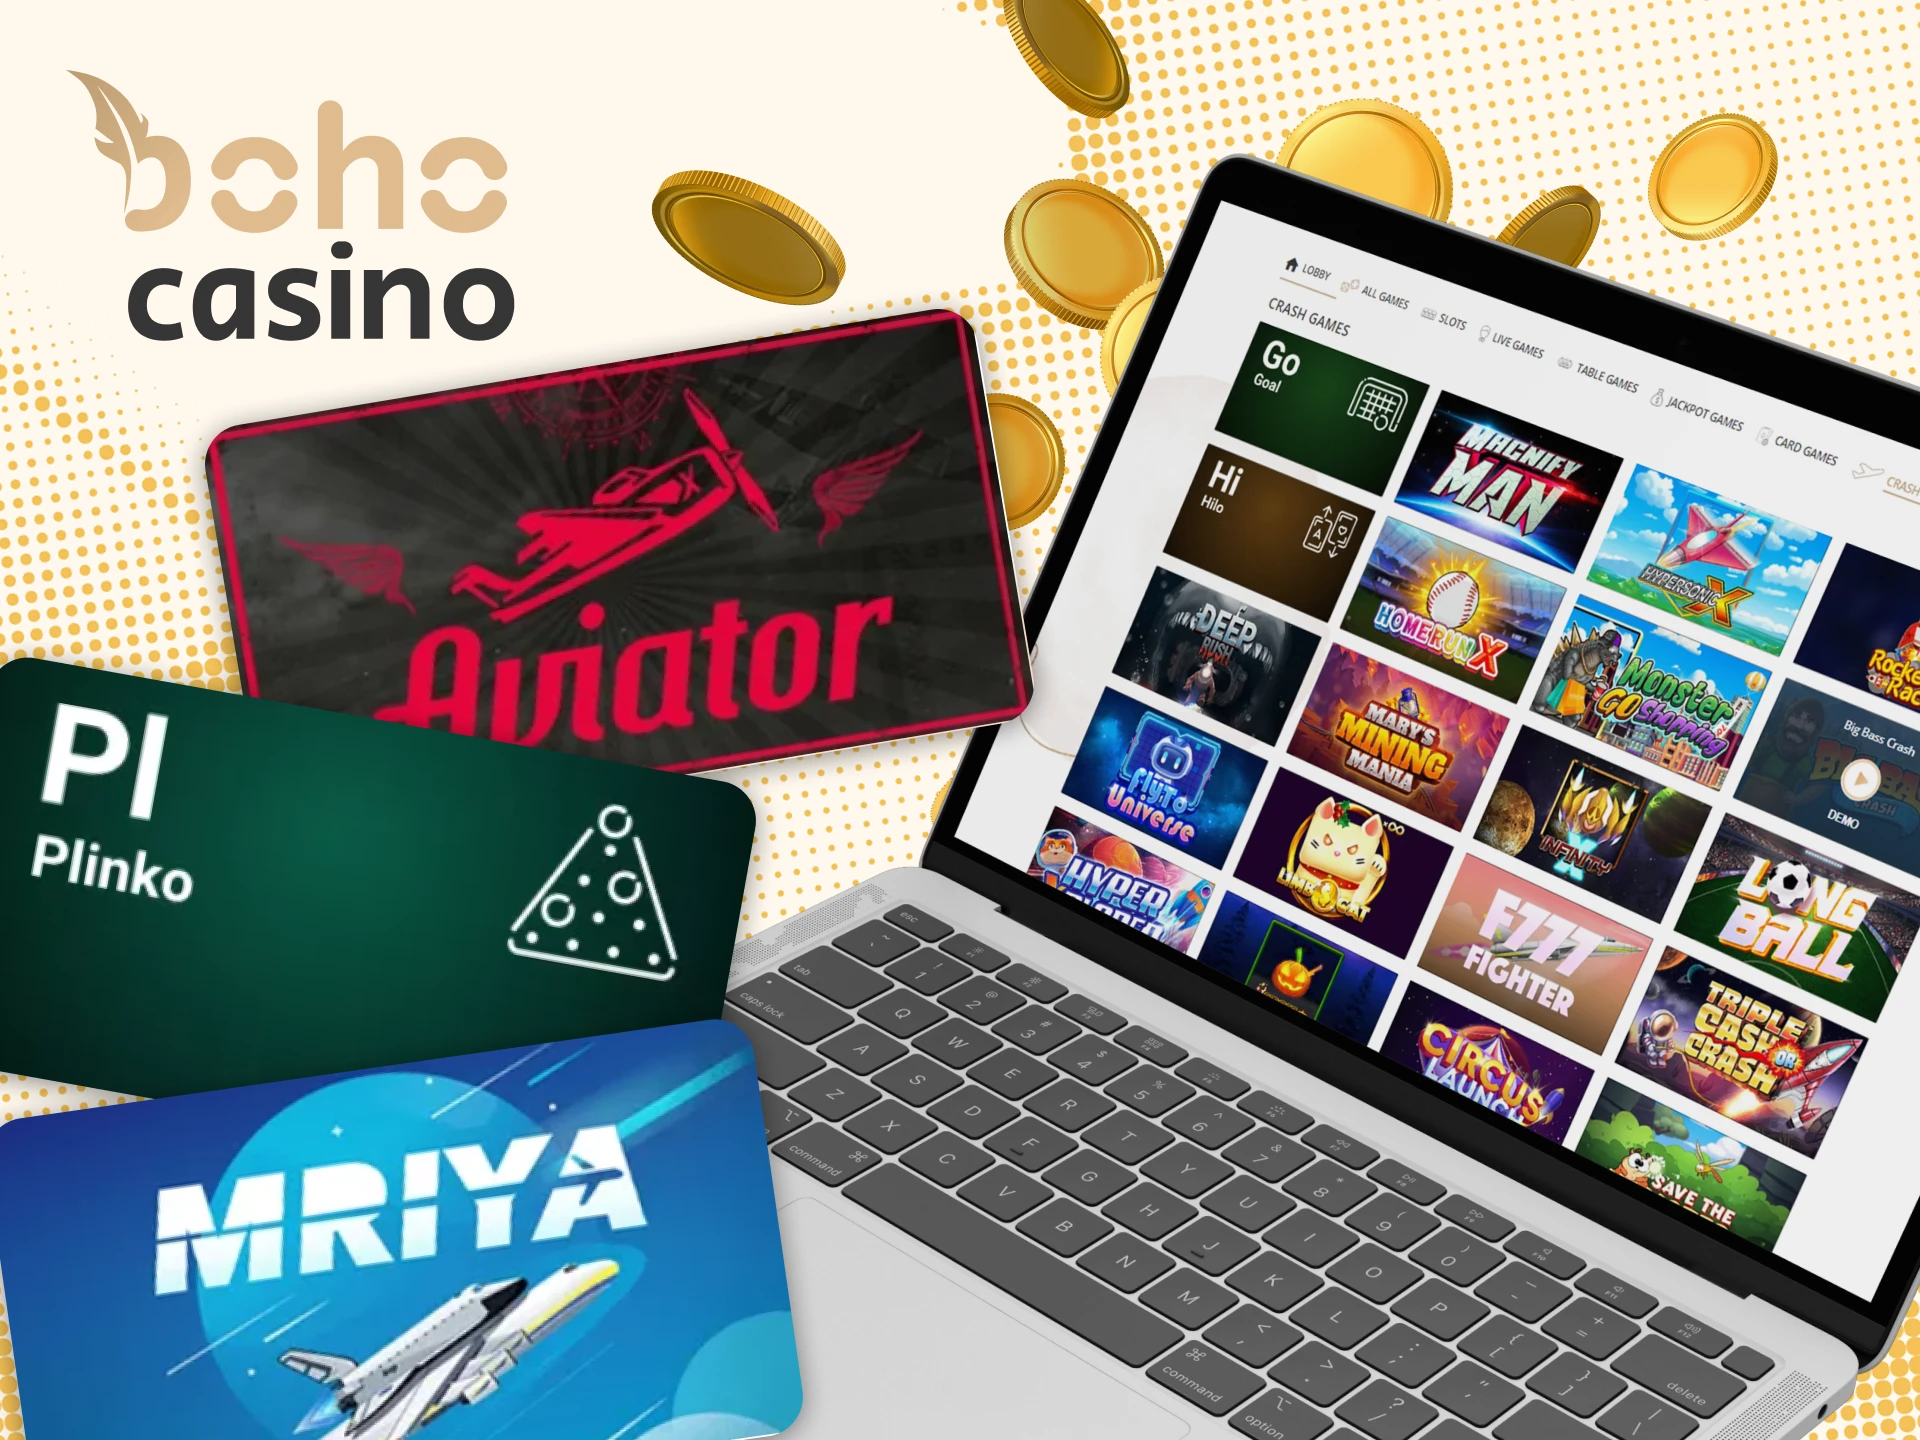 Play the best crash games at Boho Casino in New Zealand.